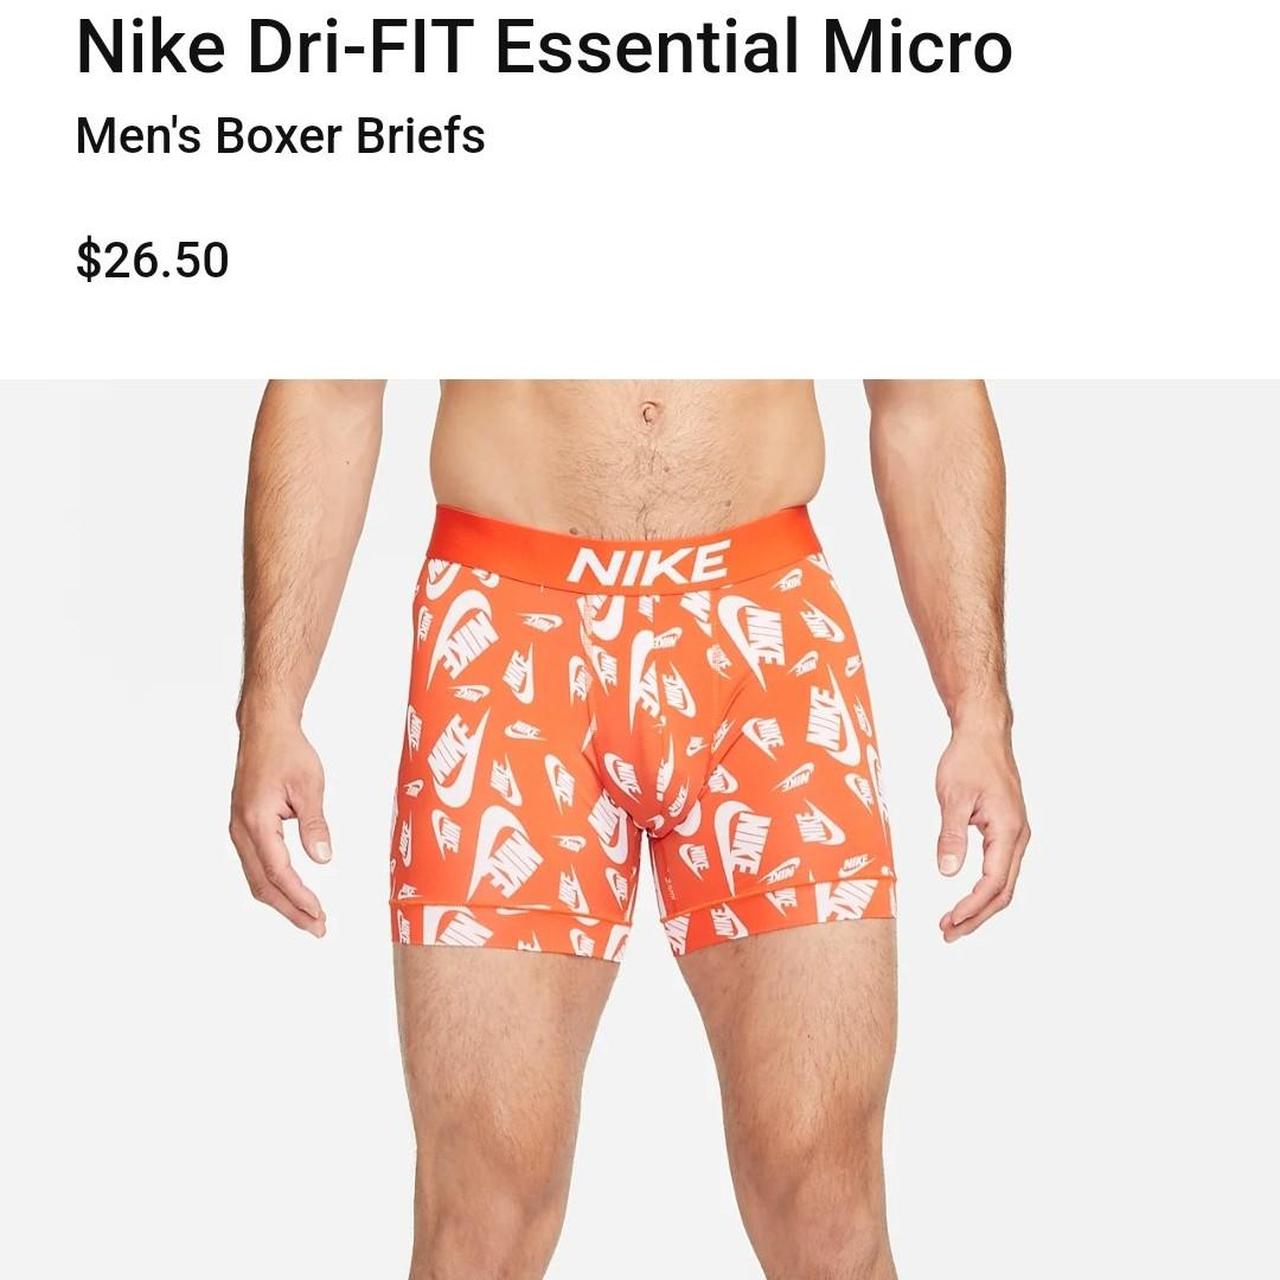 Nike Men's Orange and White Boxers-and-briefs (2)